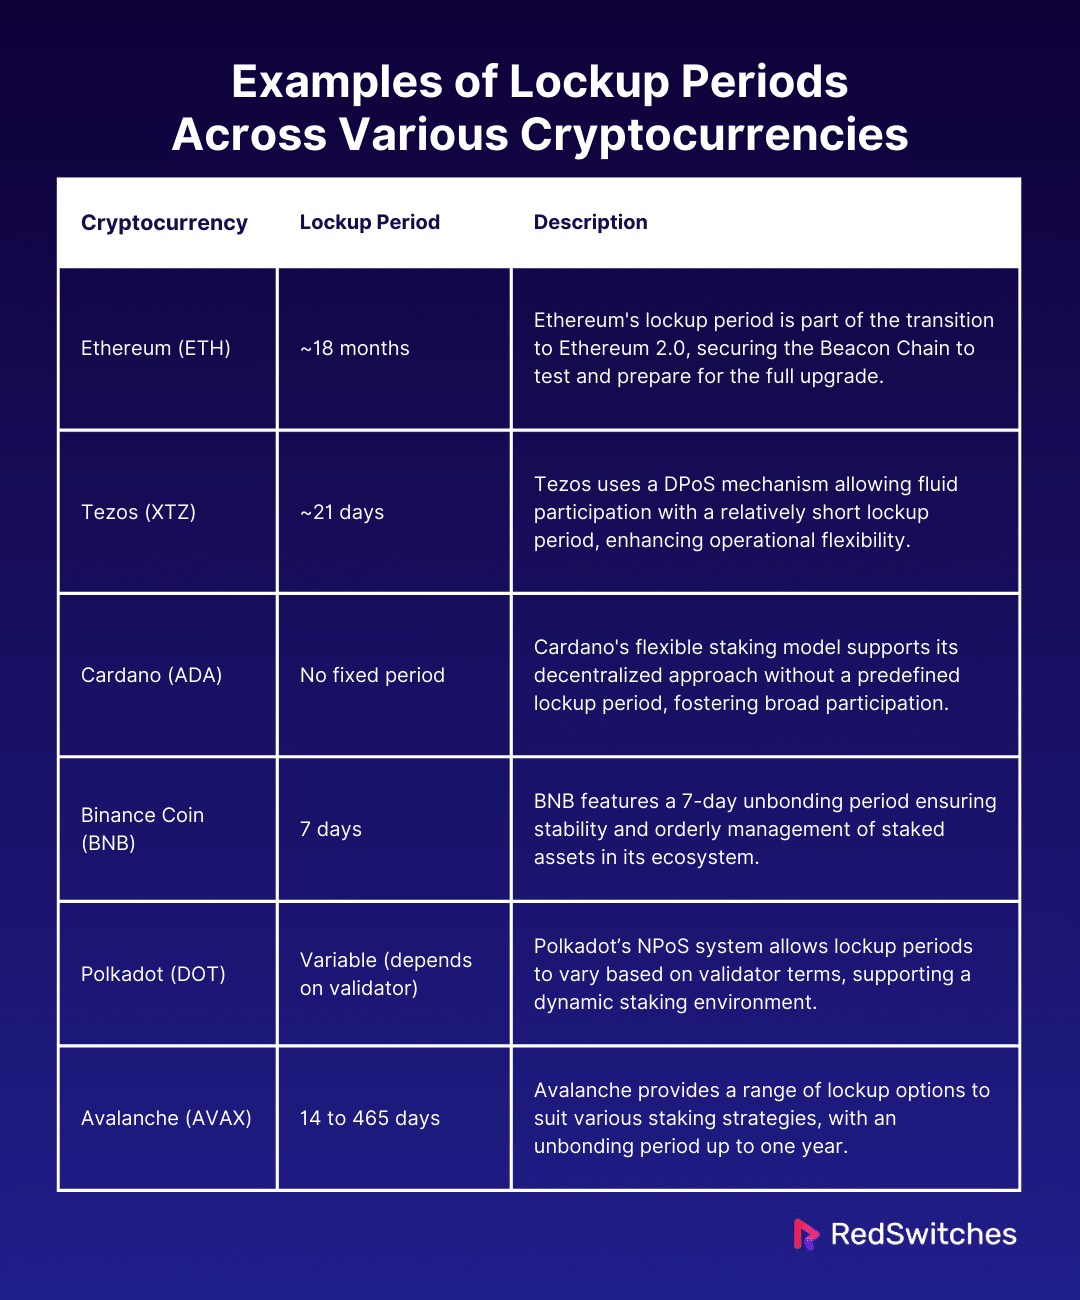 Examples of Lockup Periods Across Various Cryptocurrencies